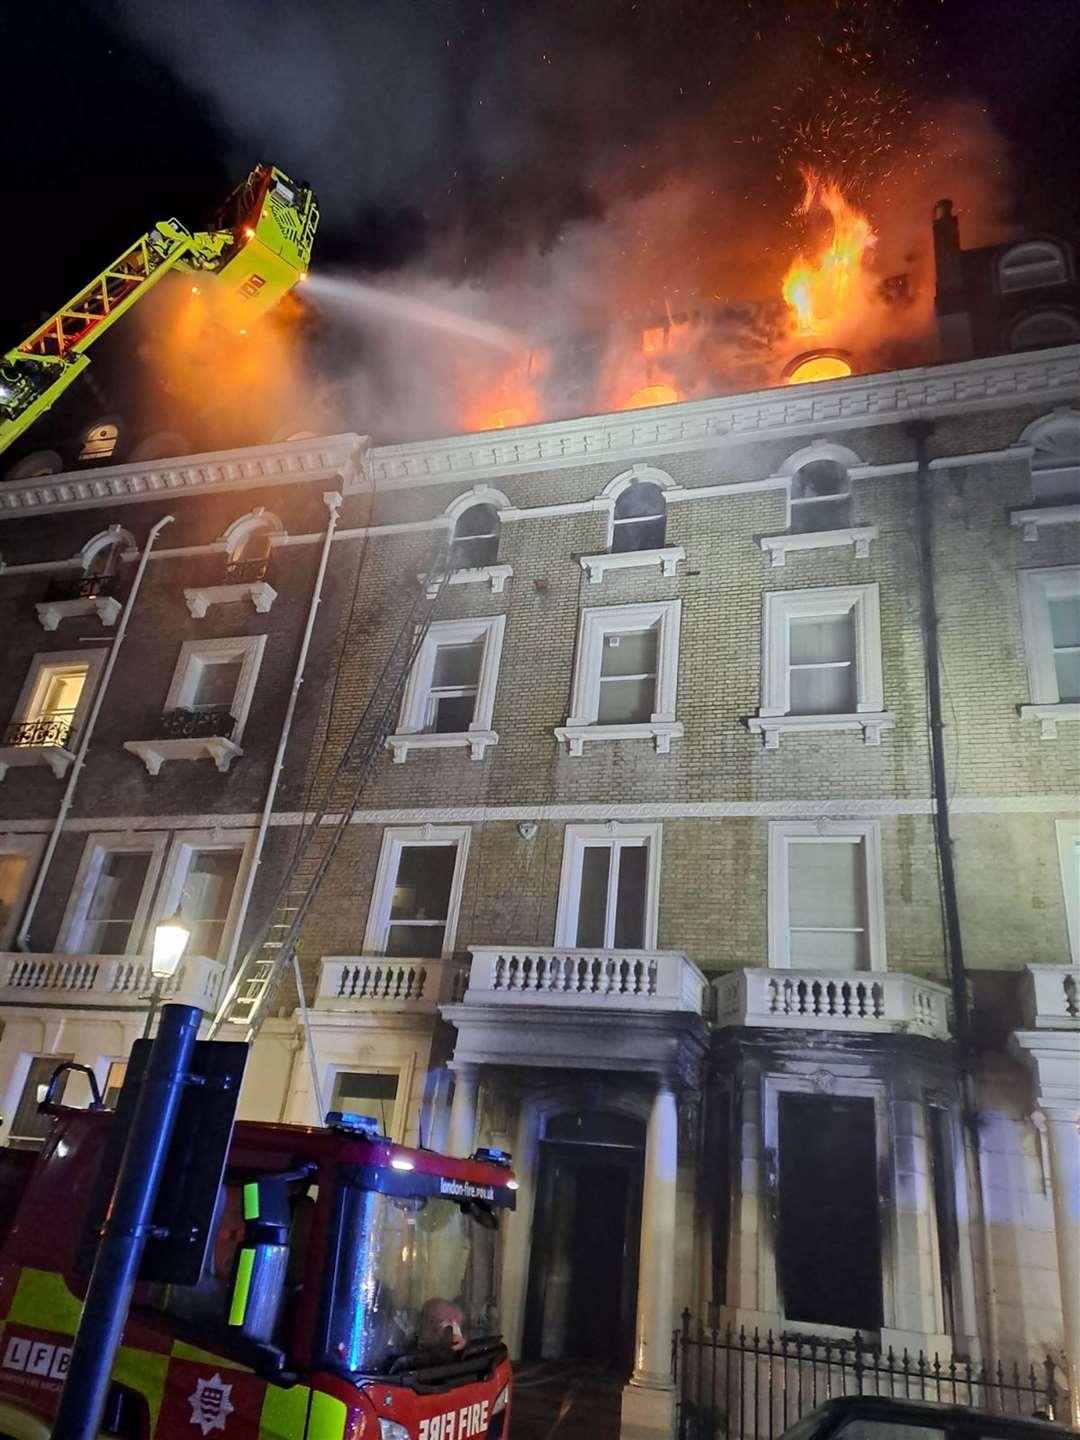 Emergency services at the scene of the fire (London Fire Brigade/PA)